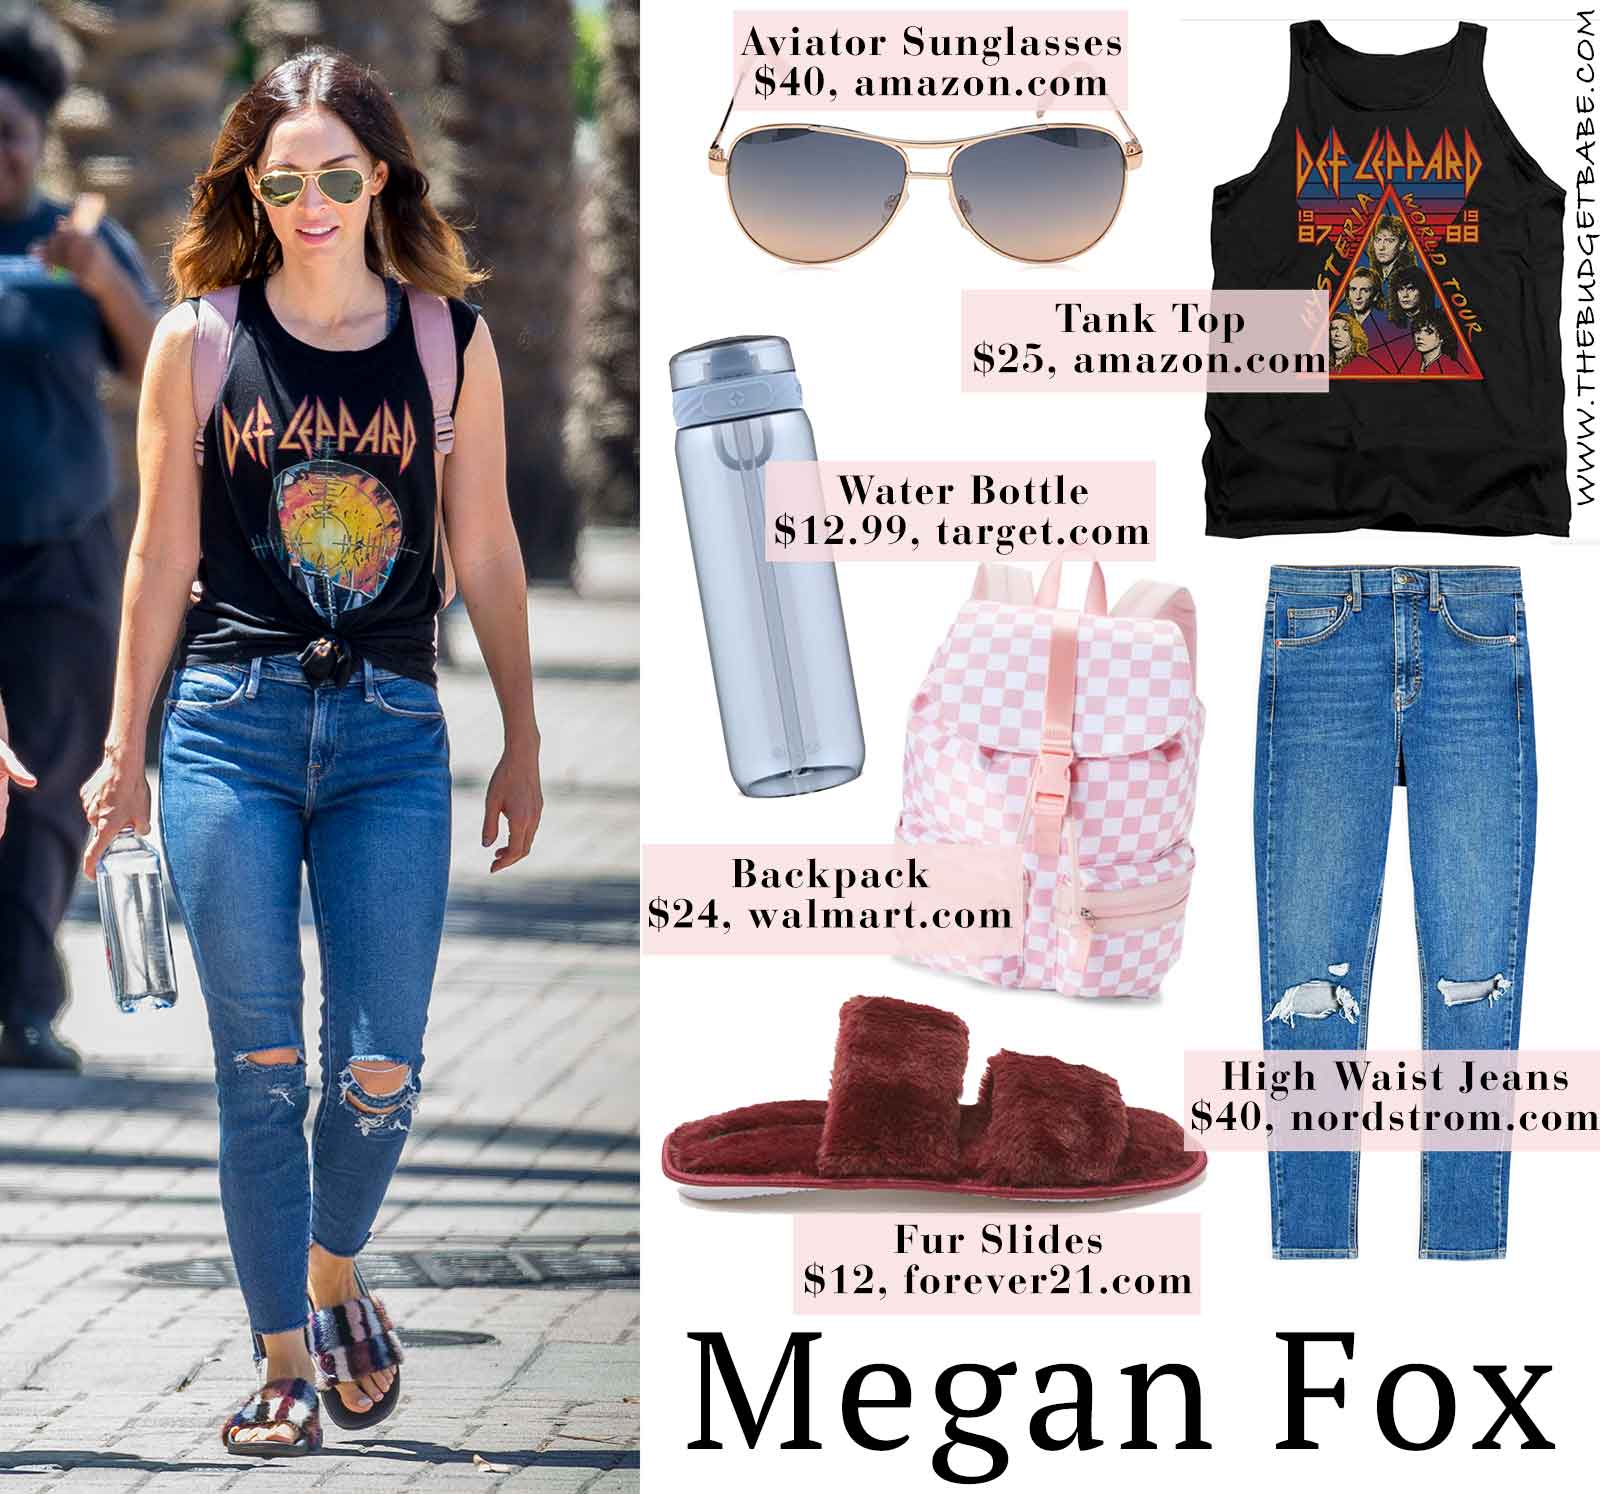 Megan Fox band tee and fuzzy slides look for less